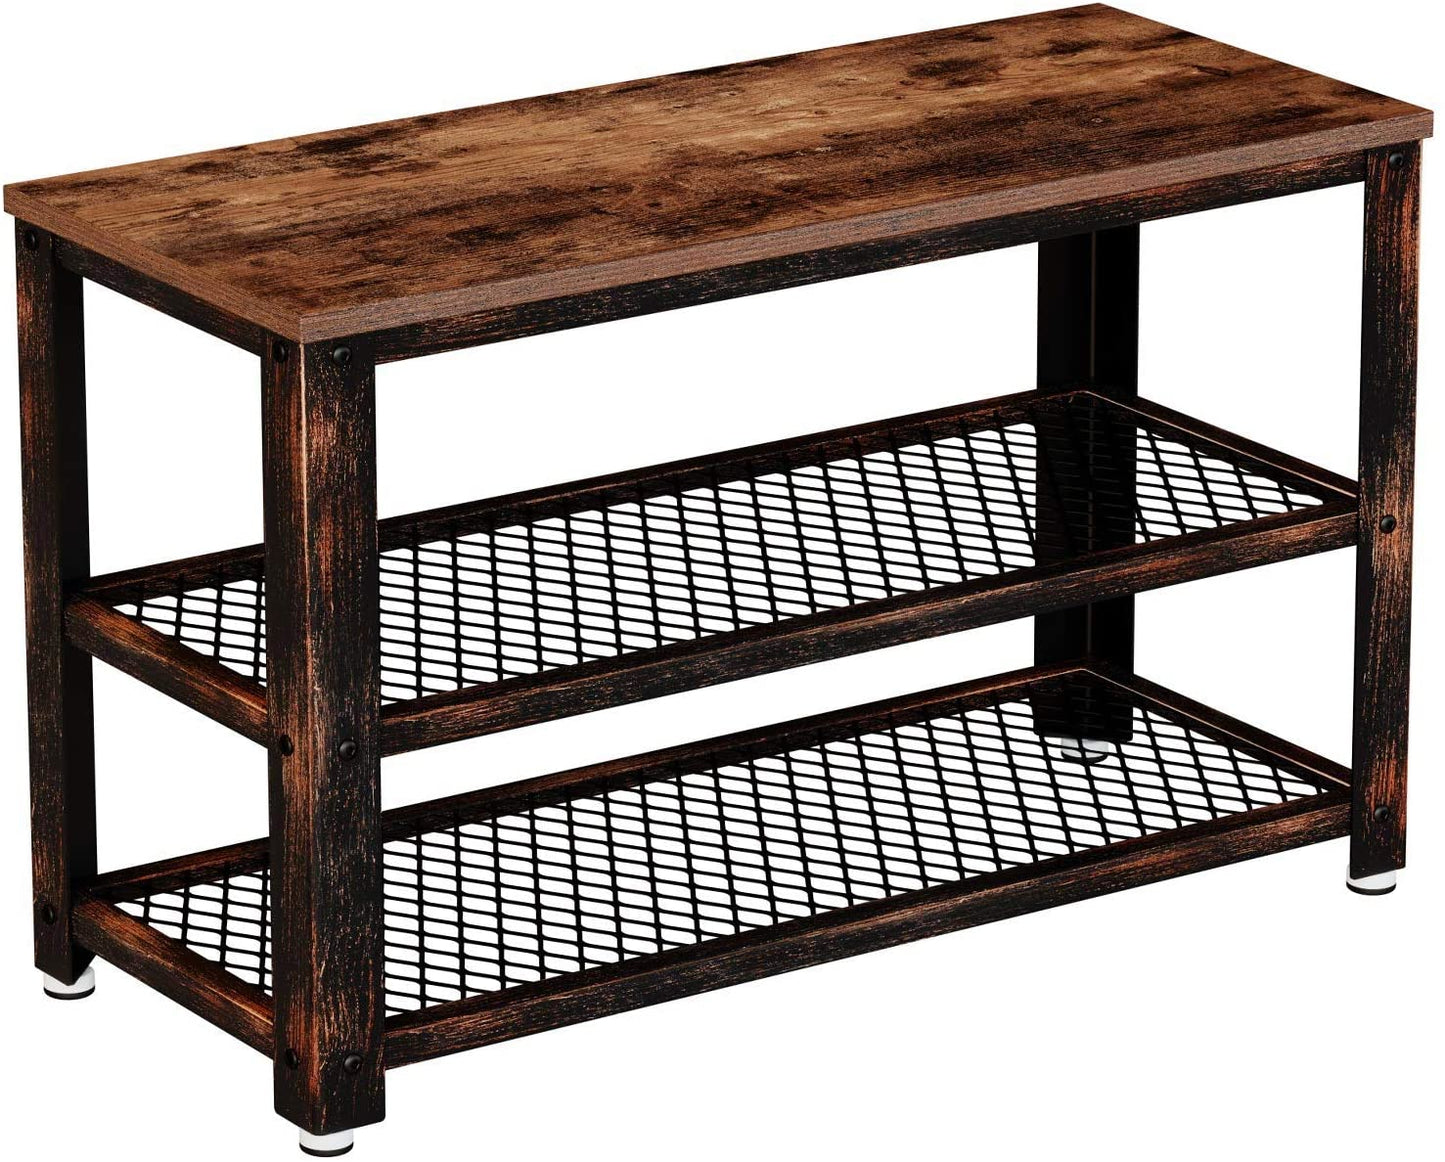 Benches Storage Entry Bench with Mesh Shelves Wood Seat, Rustic Foyer Bench for Hallway Front Door, Doorway, Living Room, Mudroom, Steel Frame, Rustic Brown 